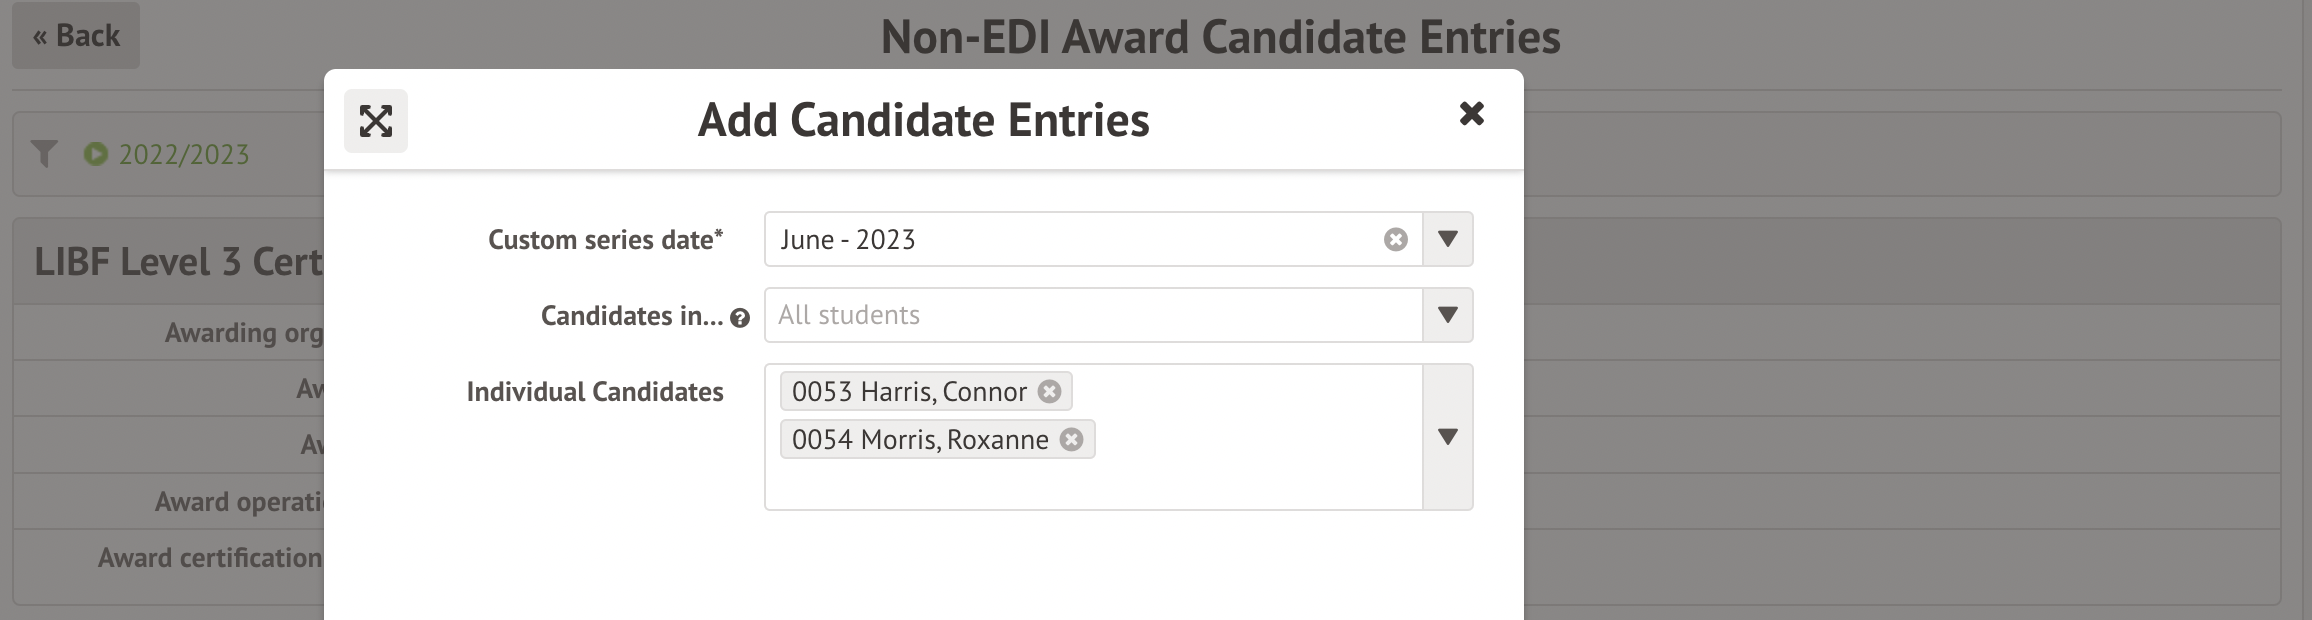 add candidate entries.png